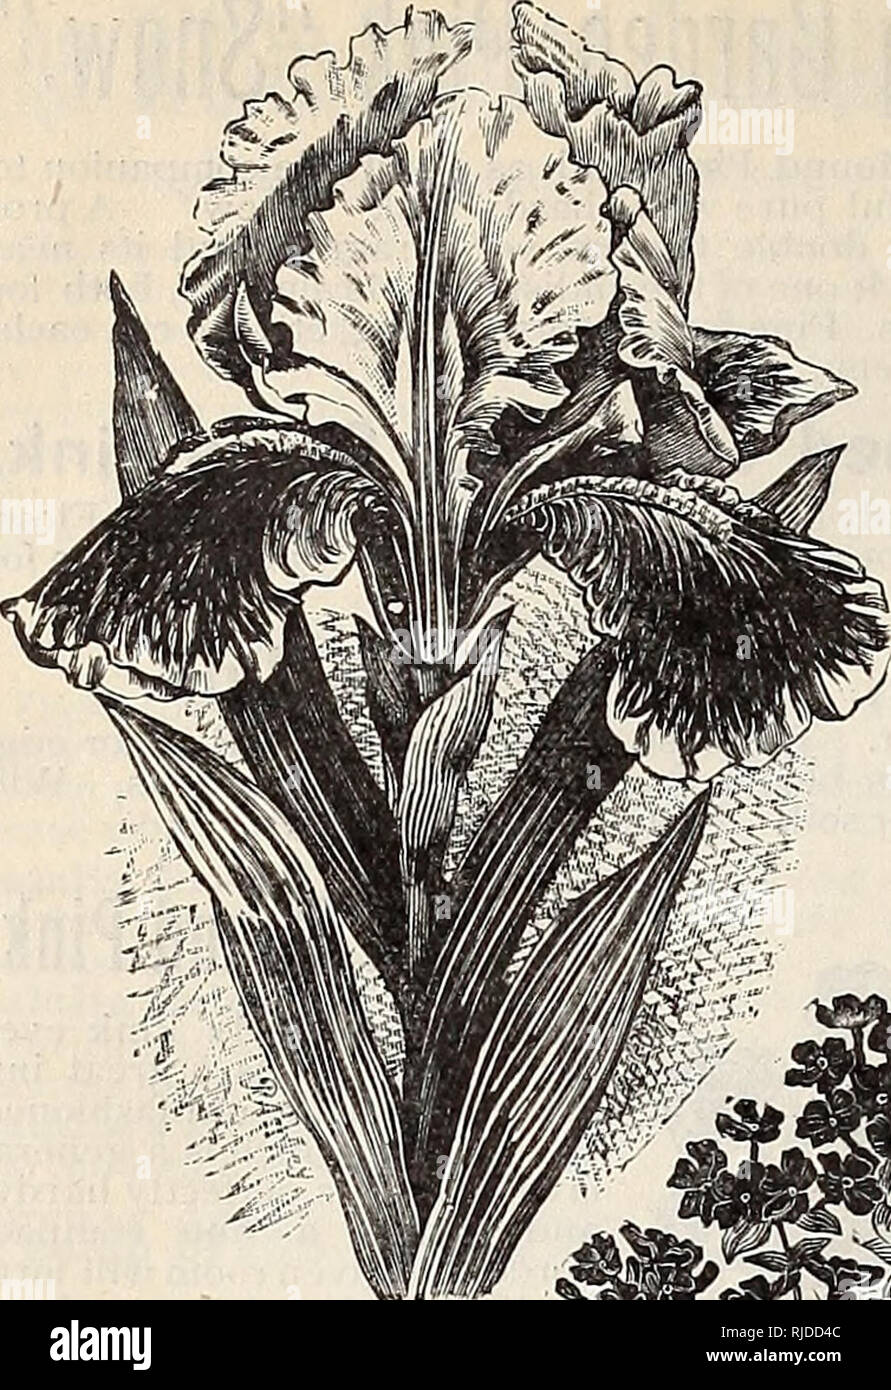 . Chaapel's flowers plants and seeds. Nurseries (Horticulture) Pennsylvania Williamsport Catalogs; Nursery stock Pennsylvania Williamsport Catalogs; Seeds Pennsylvania Williamsport Catalogs. Iris Rainbow Flower ox Fleur-de-Lis. LEPHC0YS PlNKflTH. Similar to Riidbeckia Speciosa, the &quot; Texas Cone Flower&quot; or &quot;Cul- tivated Black-Eyed Su- san,&quot; but is superior in «;very way. One of the very best of our hardy border plants ; covered ihrough the season with hhowy heads of bright vellow flowers, having a l)lack disk in the center, resembling a cone with the ray florets much droopin Stock Photo